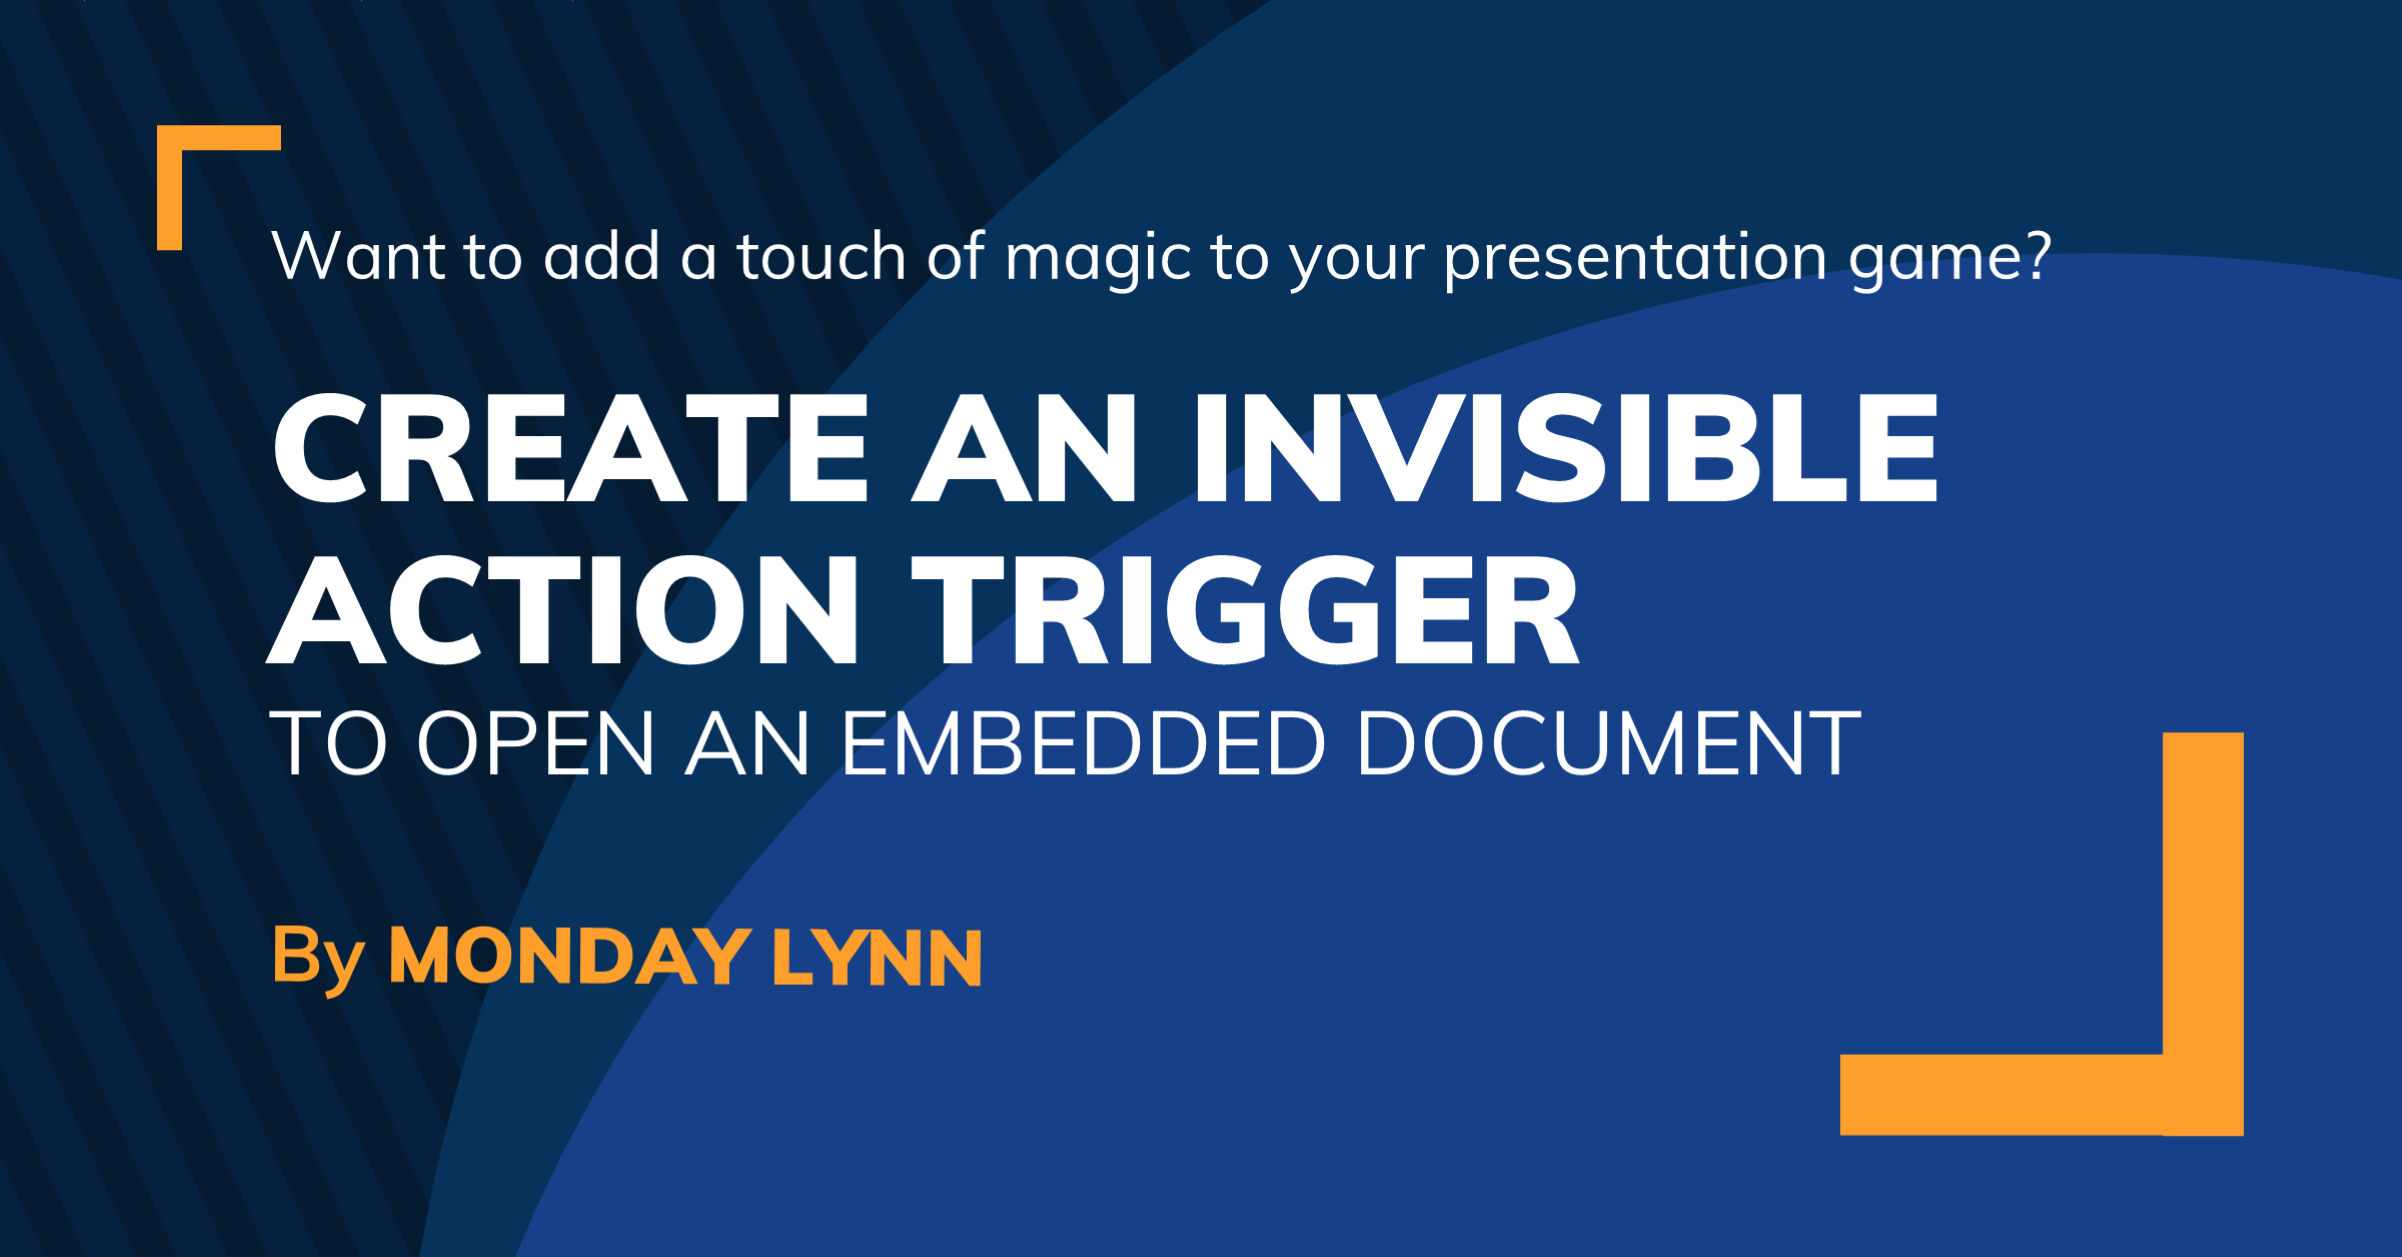 Create an Invisible Action Trigger to Open an Embedded Document